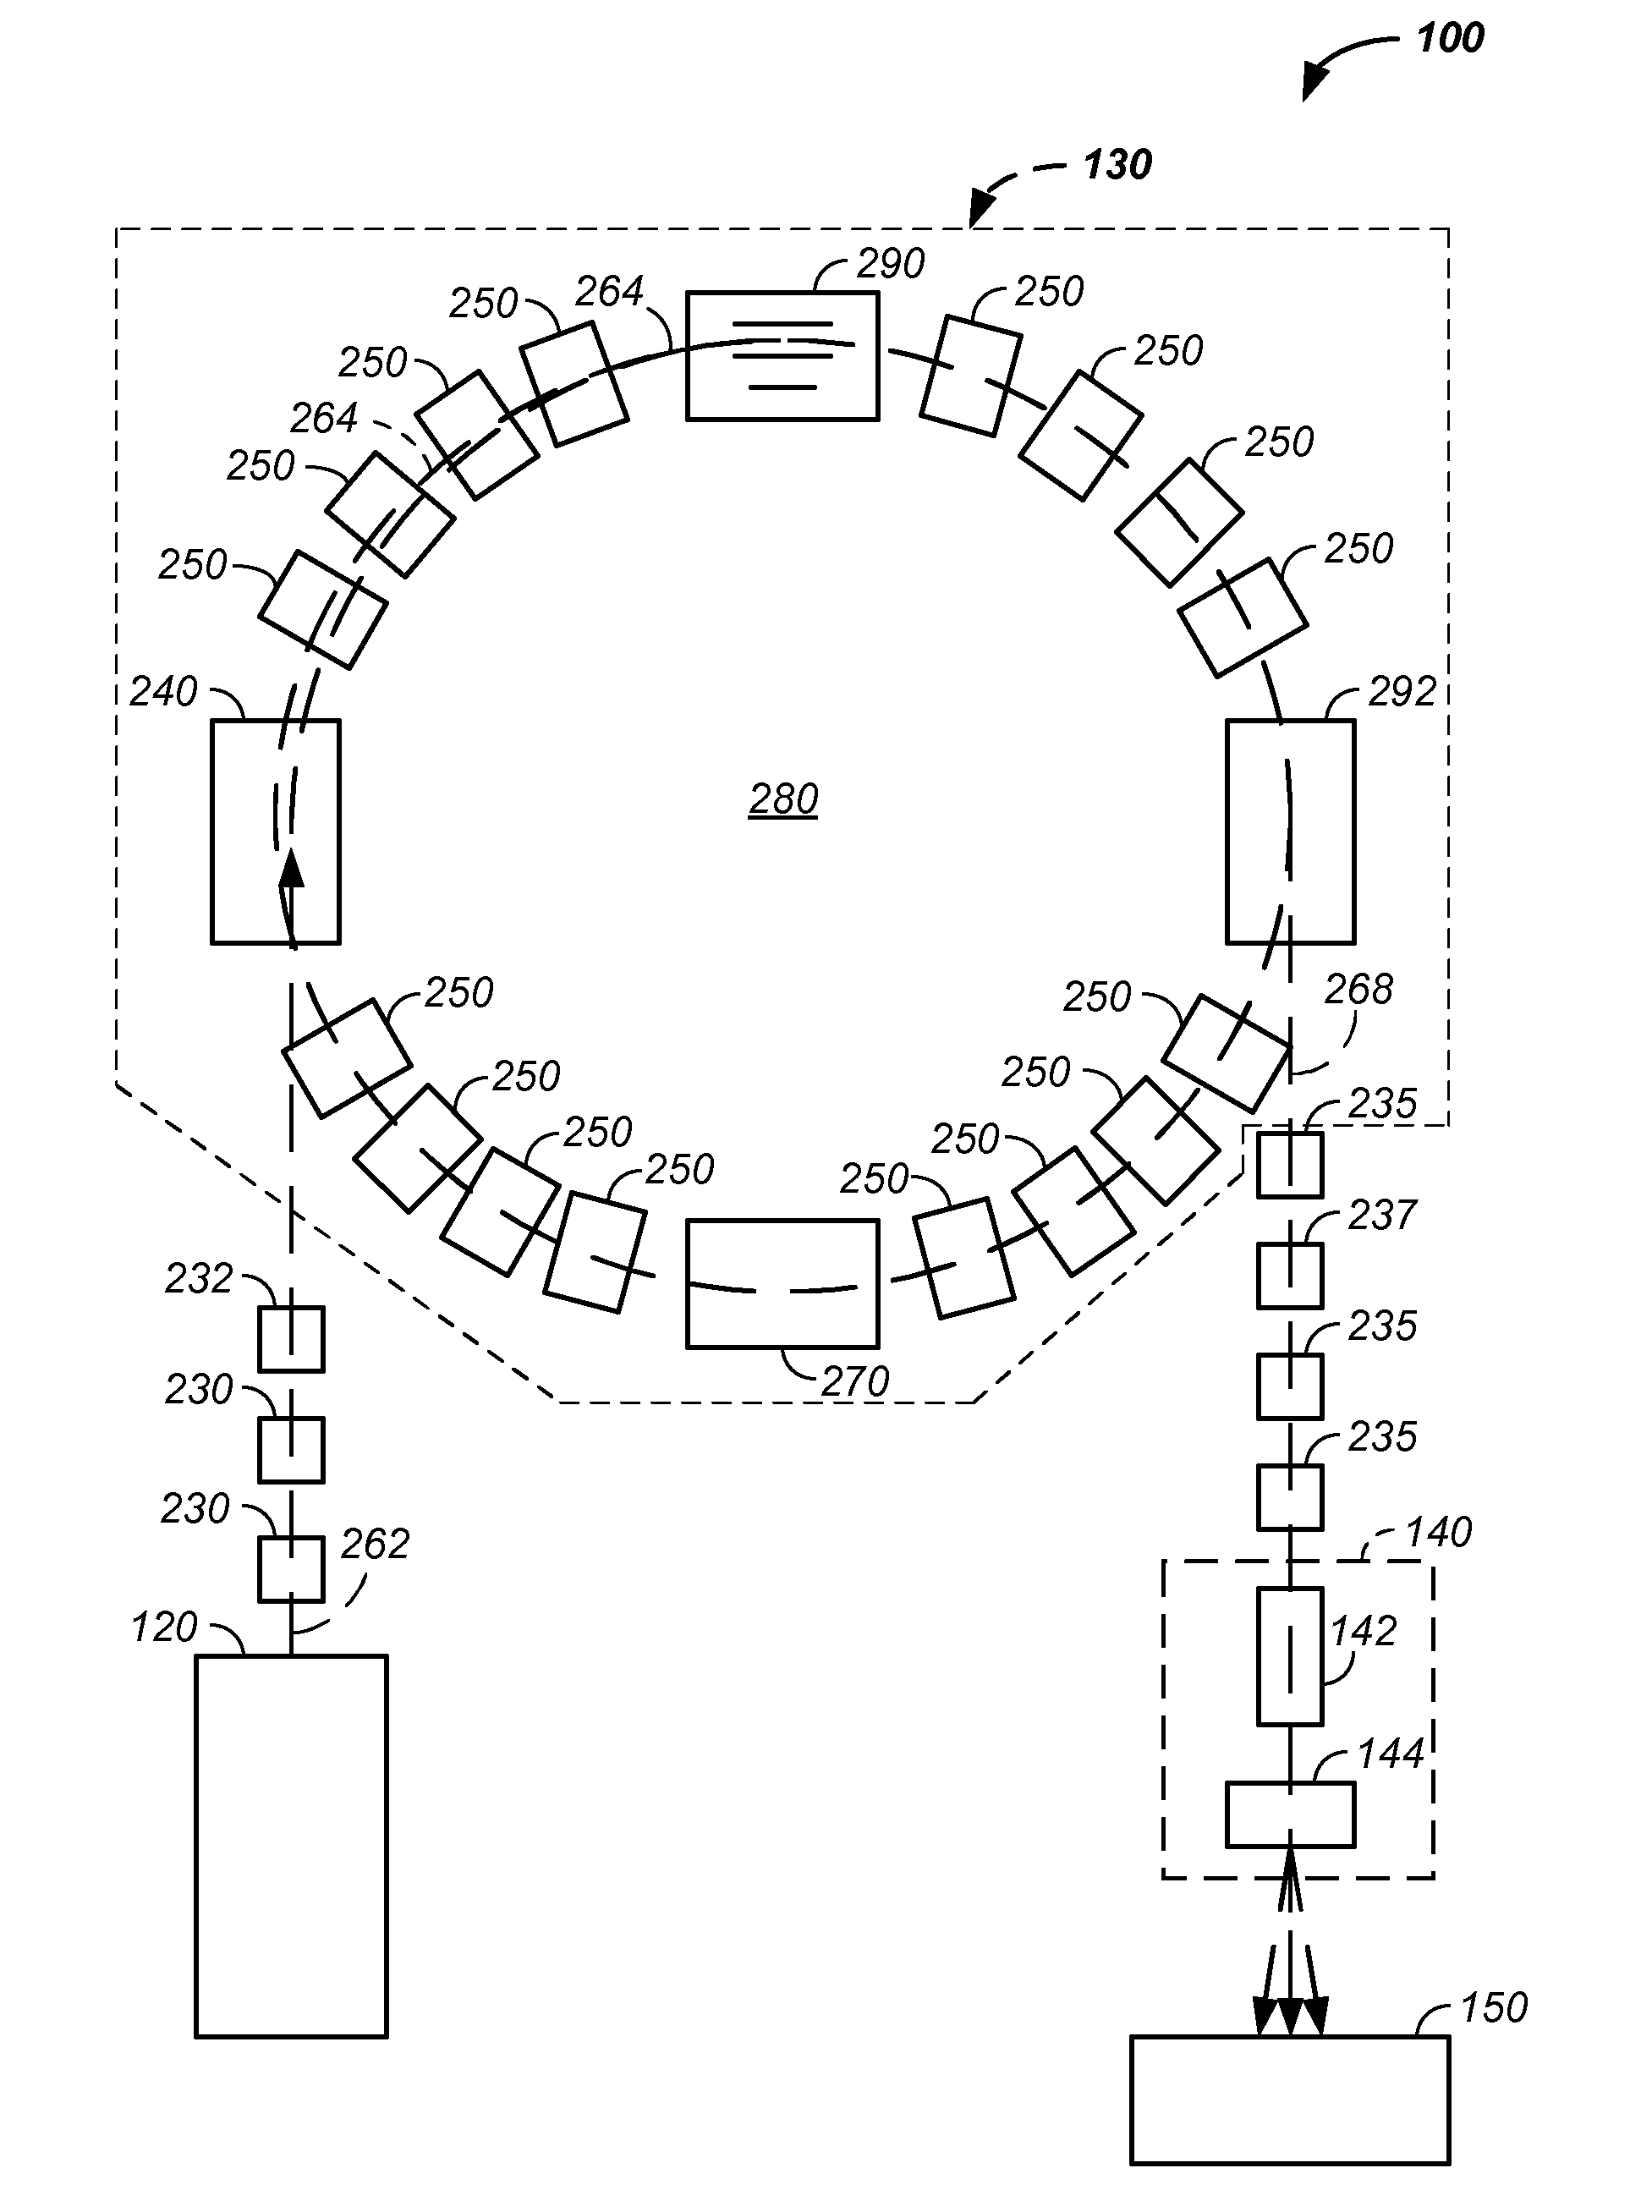 Charged particle cancer therapy patient positioning method and apparatus